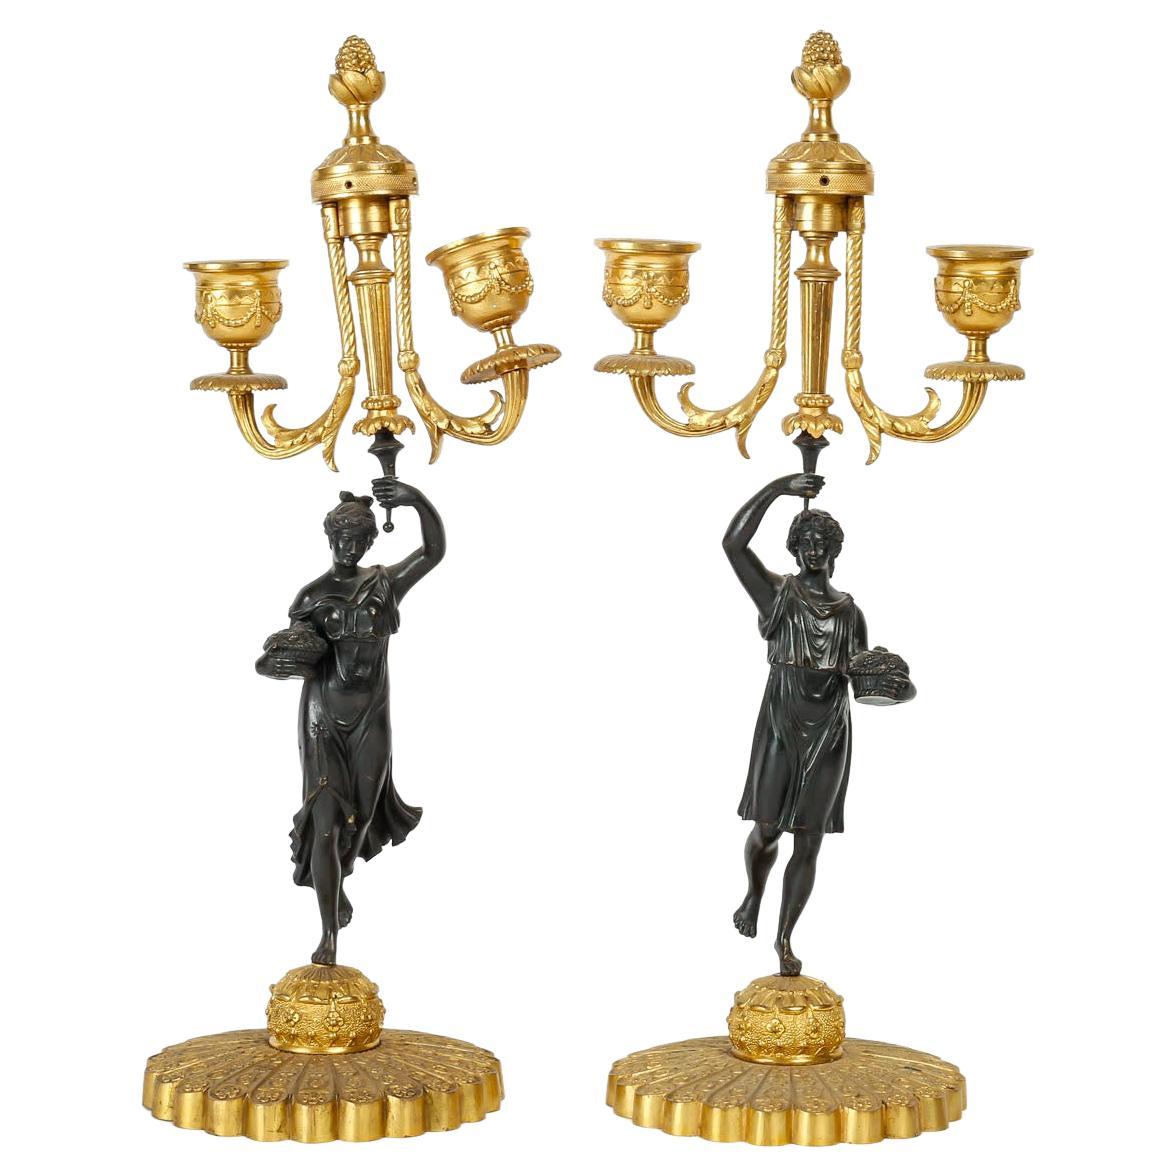  Pair of Candelabras in Patinated and Gilded Bronze, Charles X Period. For Sale